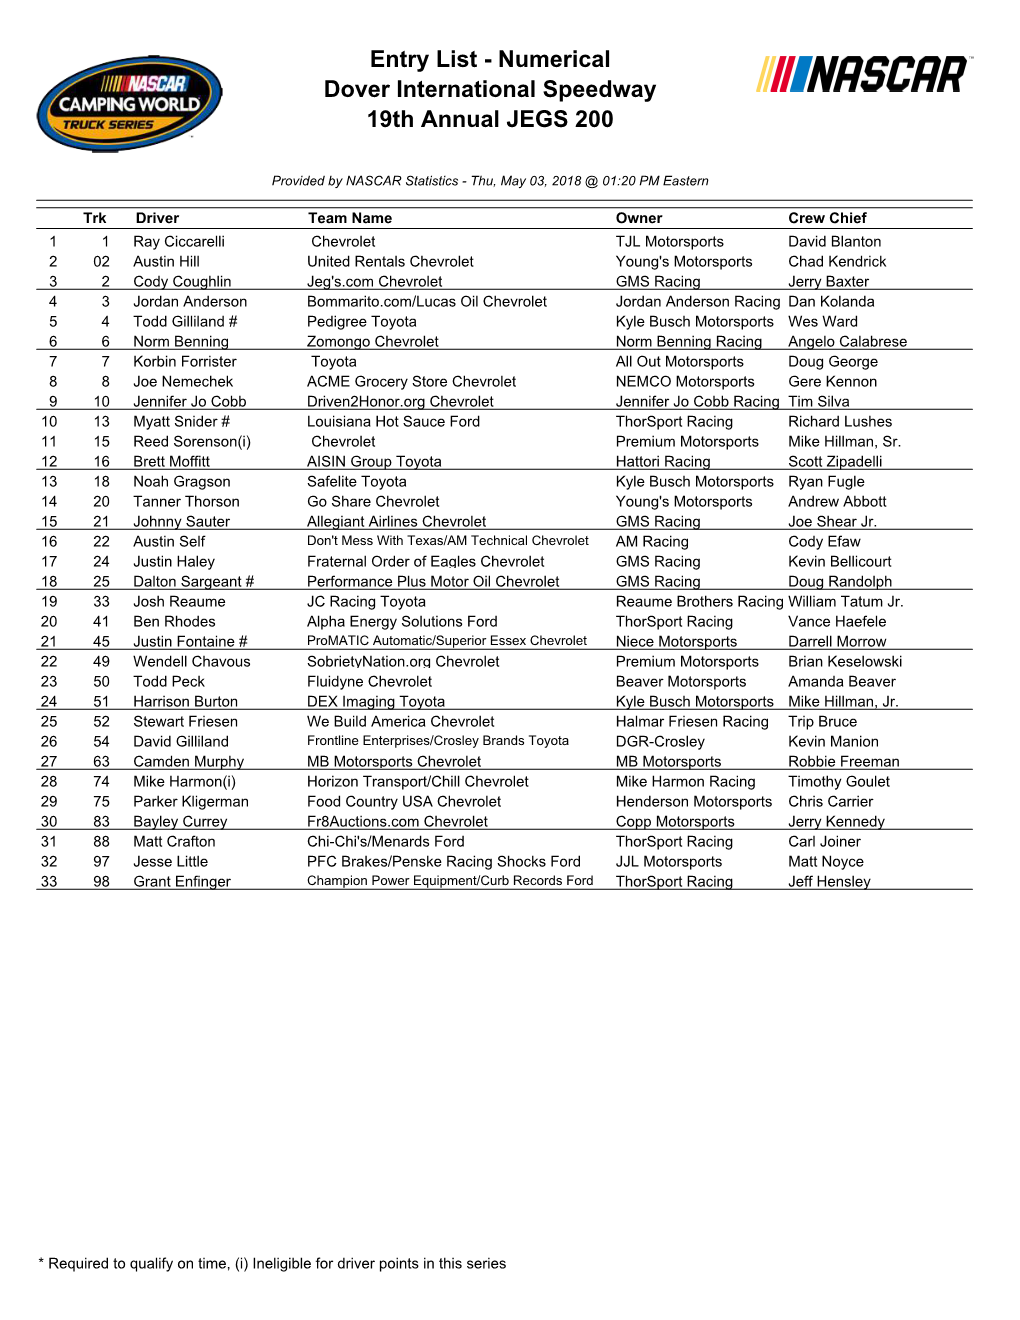 Entry List - Numerical Dover International Speedway 19Th Annual JEGS 200